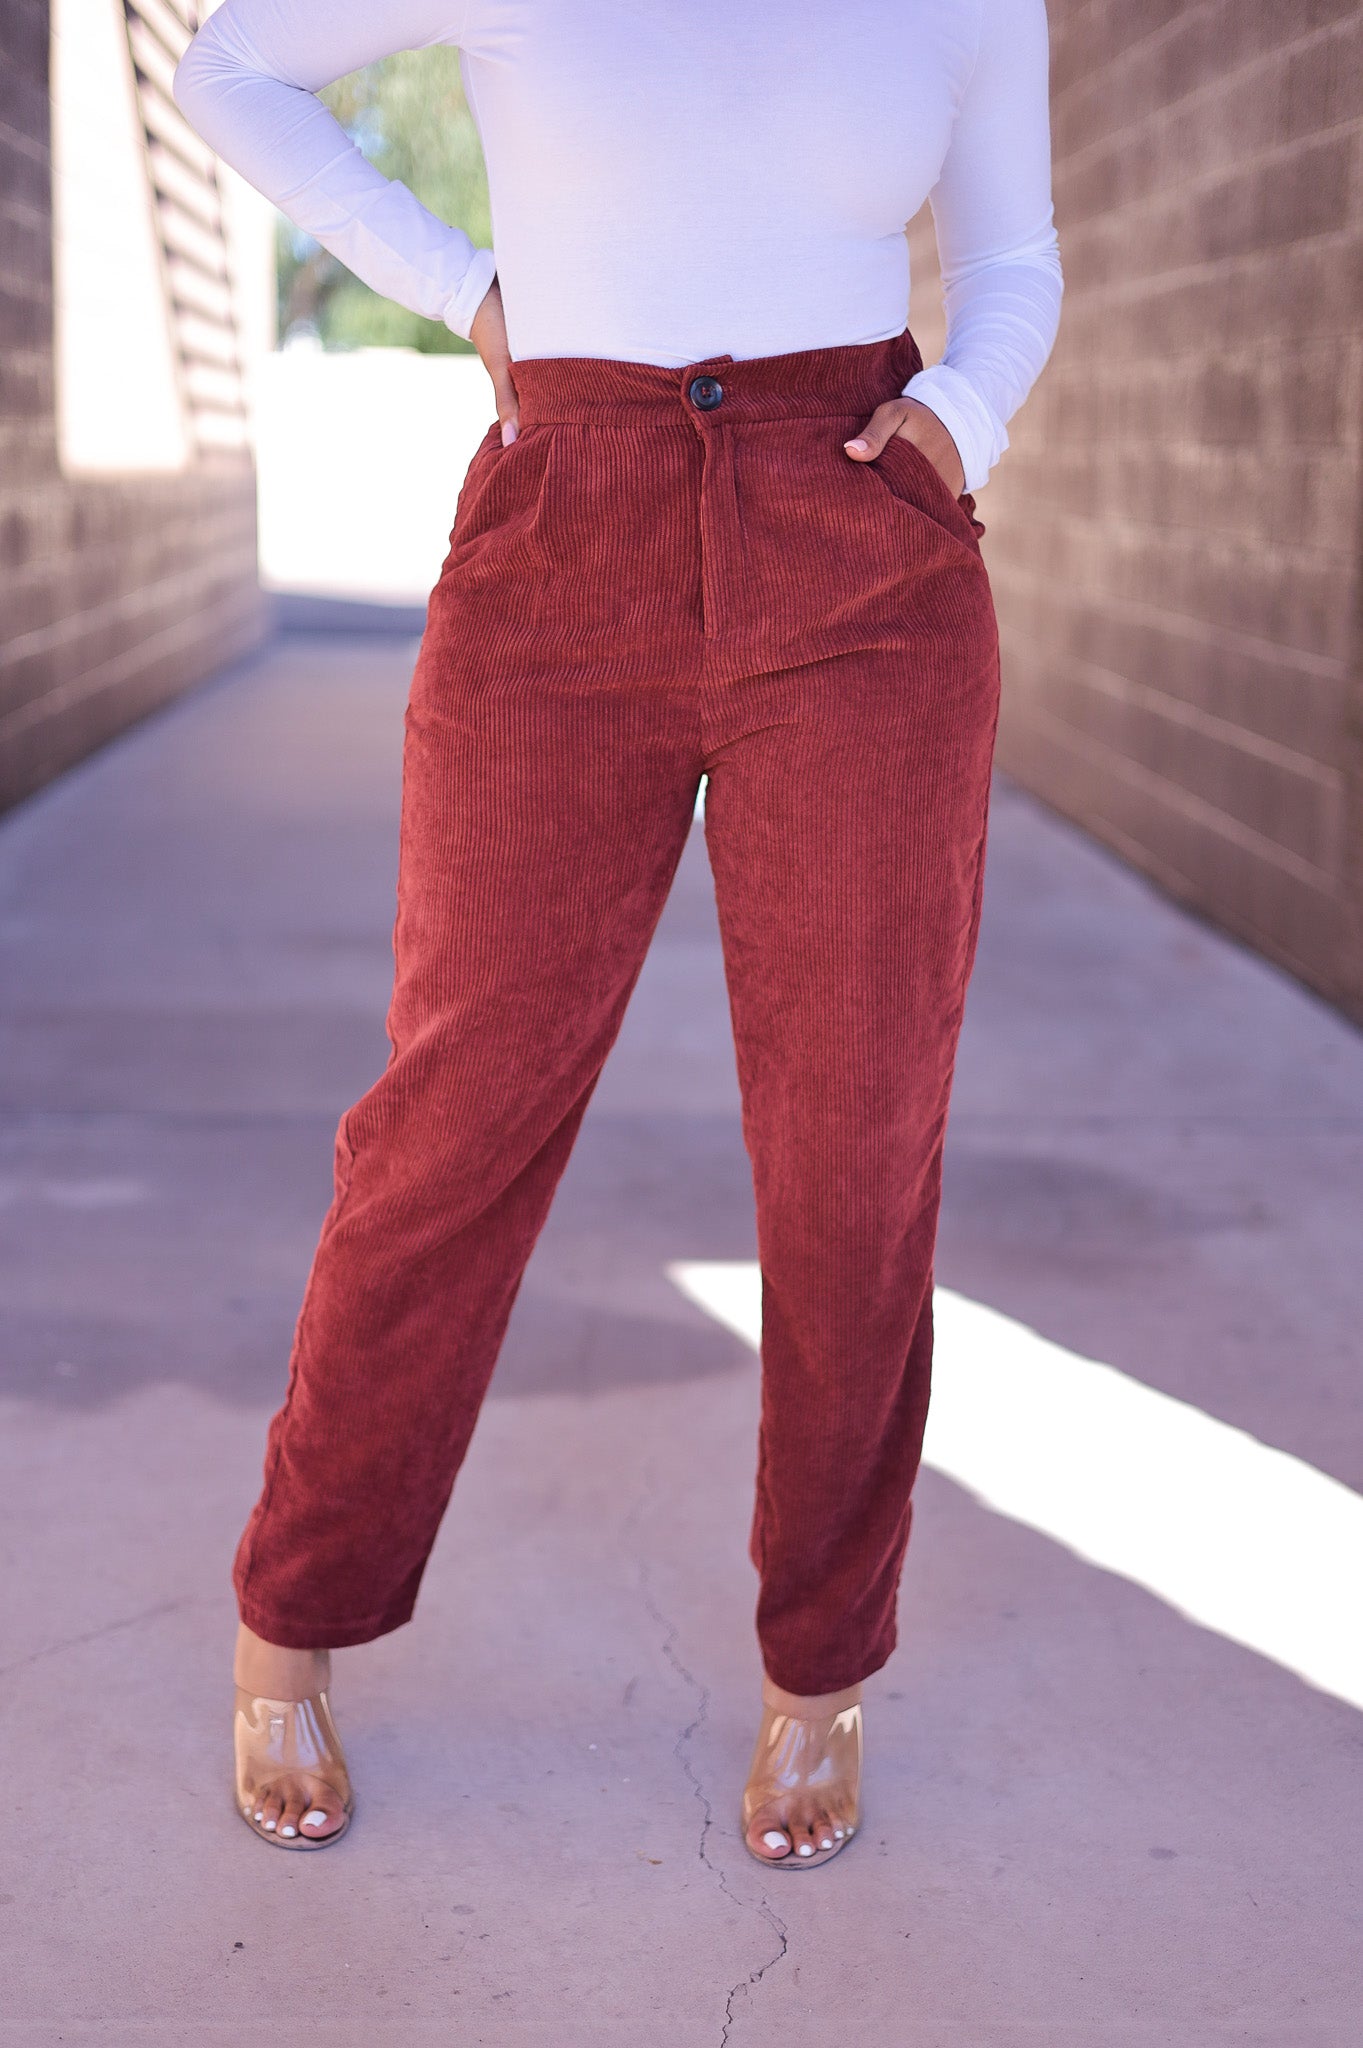 Red Corduroy Pants Outfit